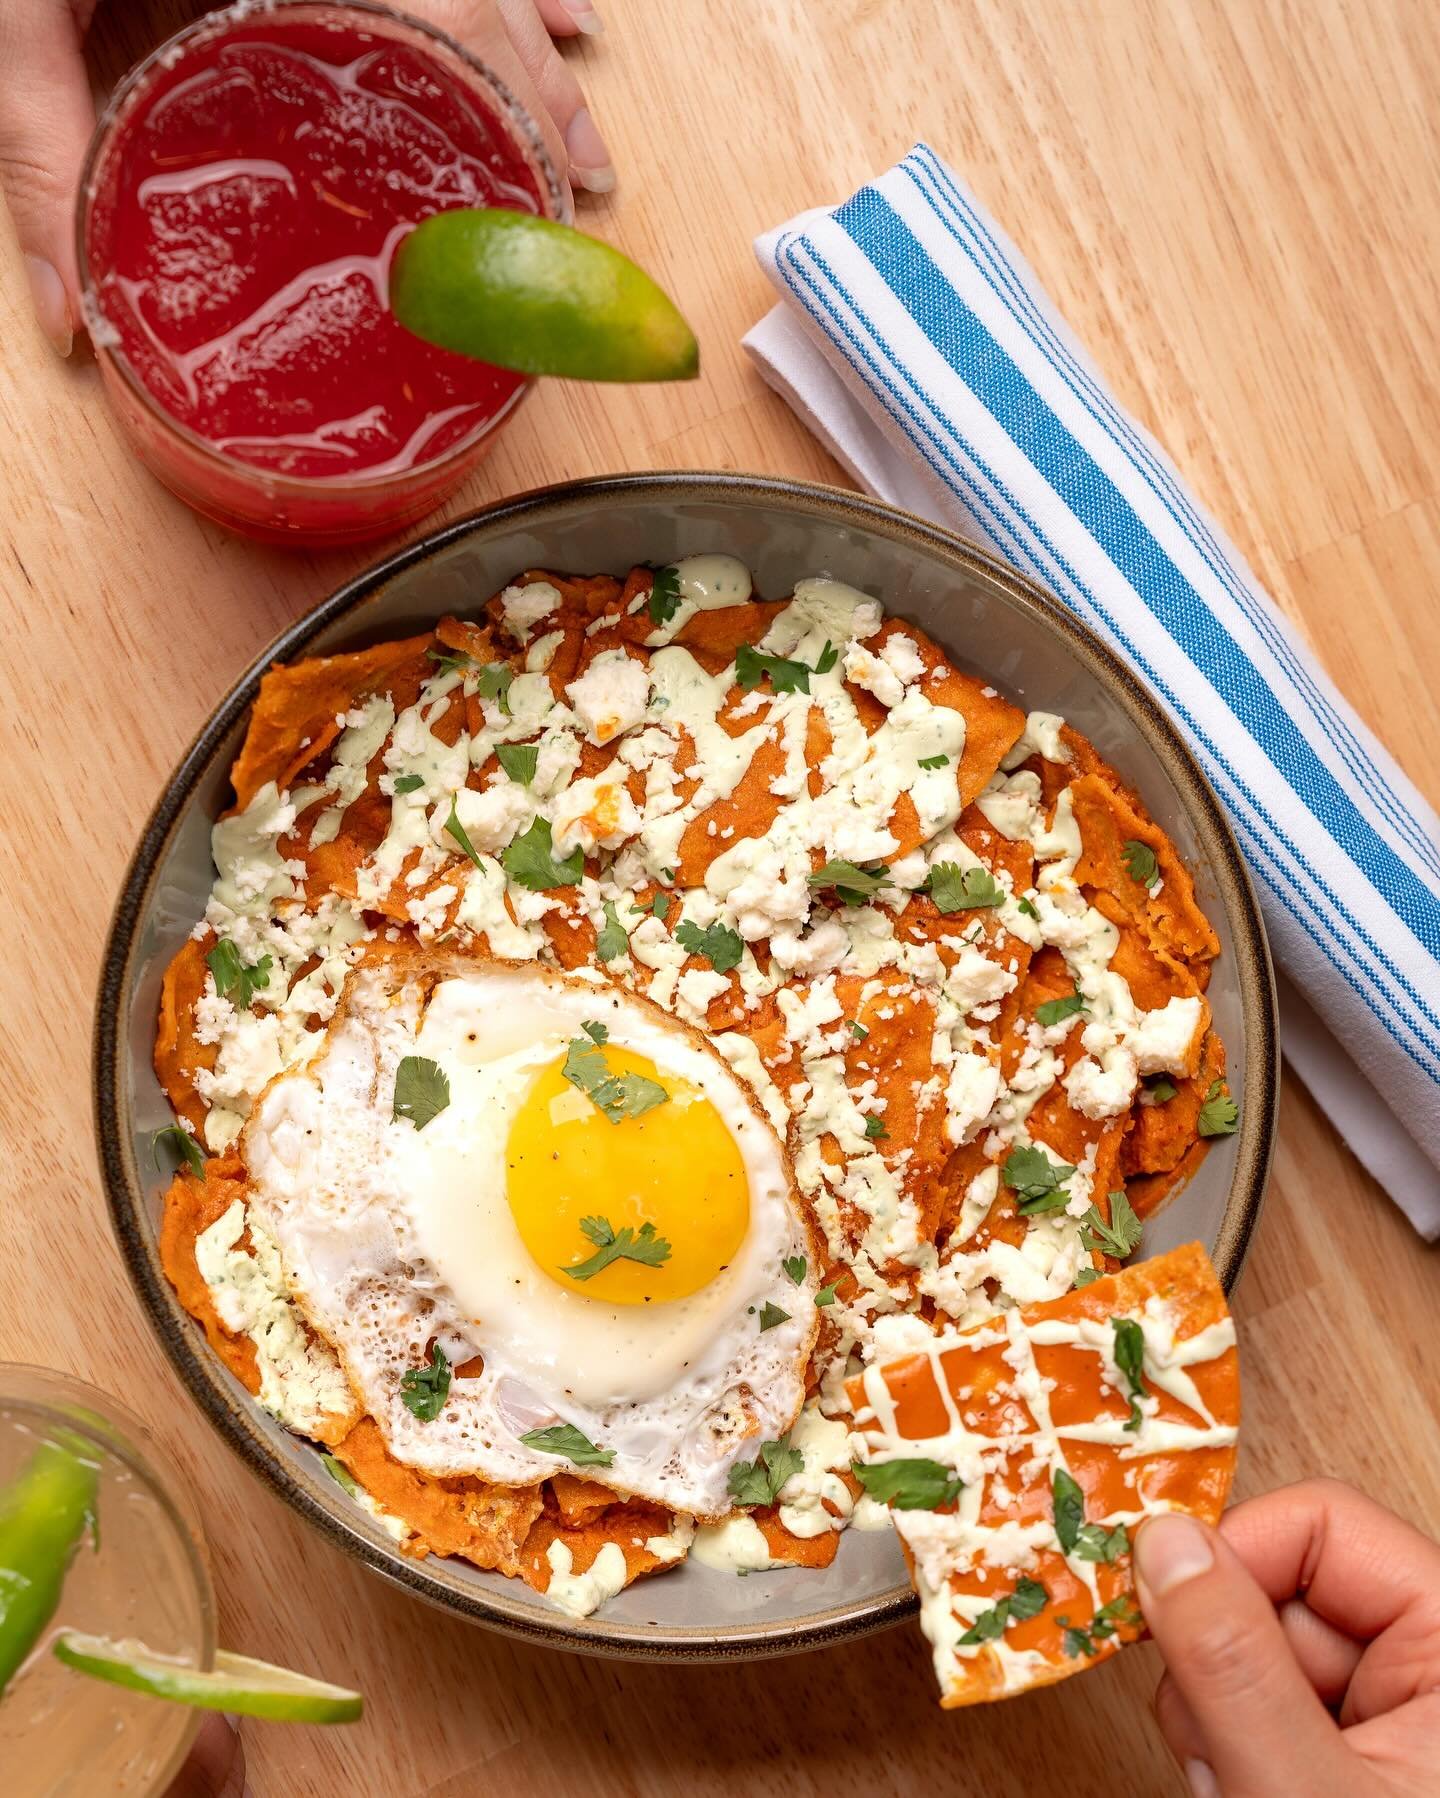 Enjoy Chilaquiles AND $8 Margs with us from 3pm-10pm today! Celebrate Cinco de Mayo at your favorite Bannerman bistro this weekend for great deals and great times. We look forward to seeing everyone soon!